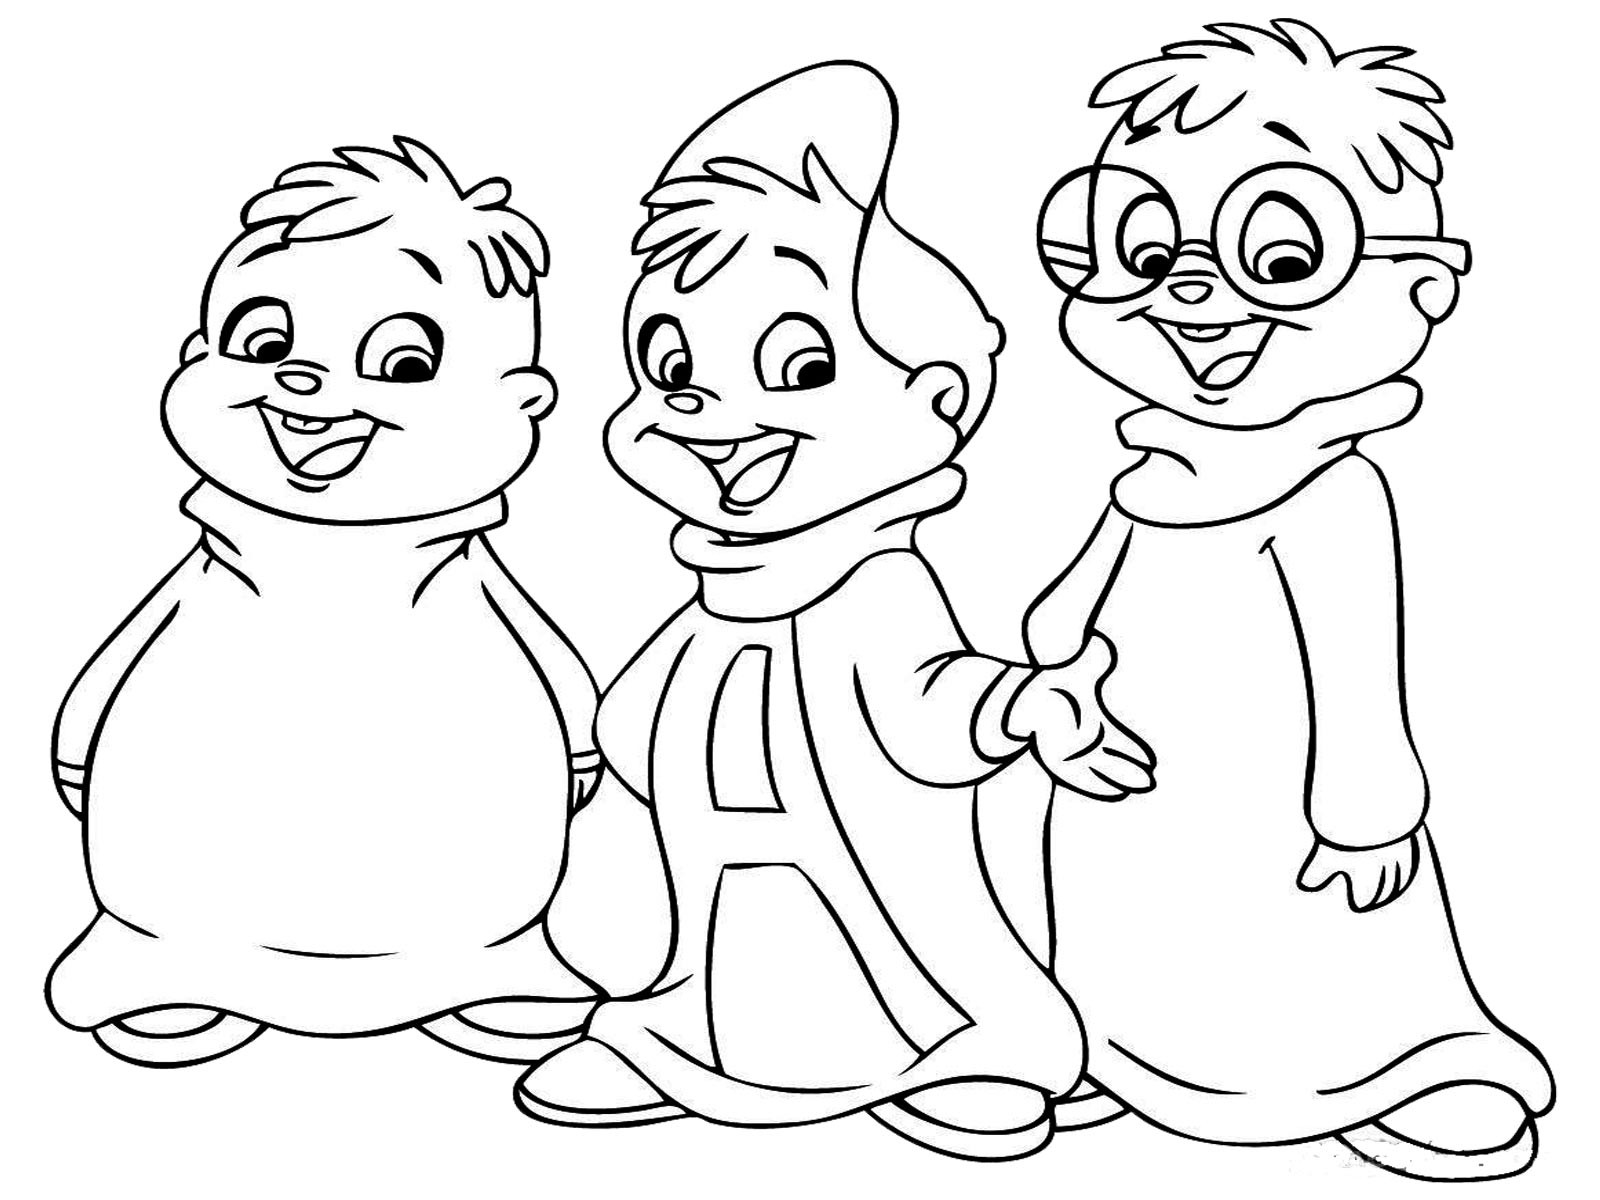 Cool Coloring Books For Kids
 Three Friends Printable Coloring Image for Kids